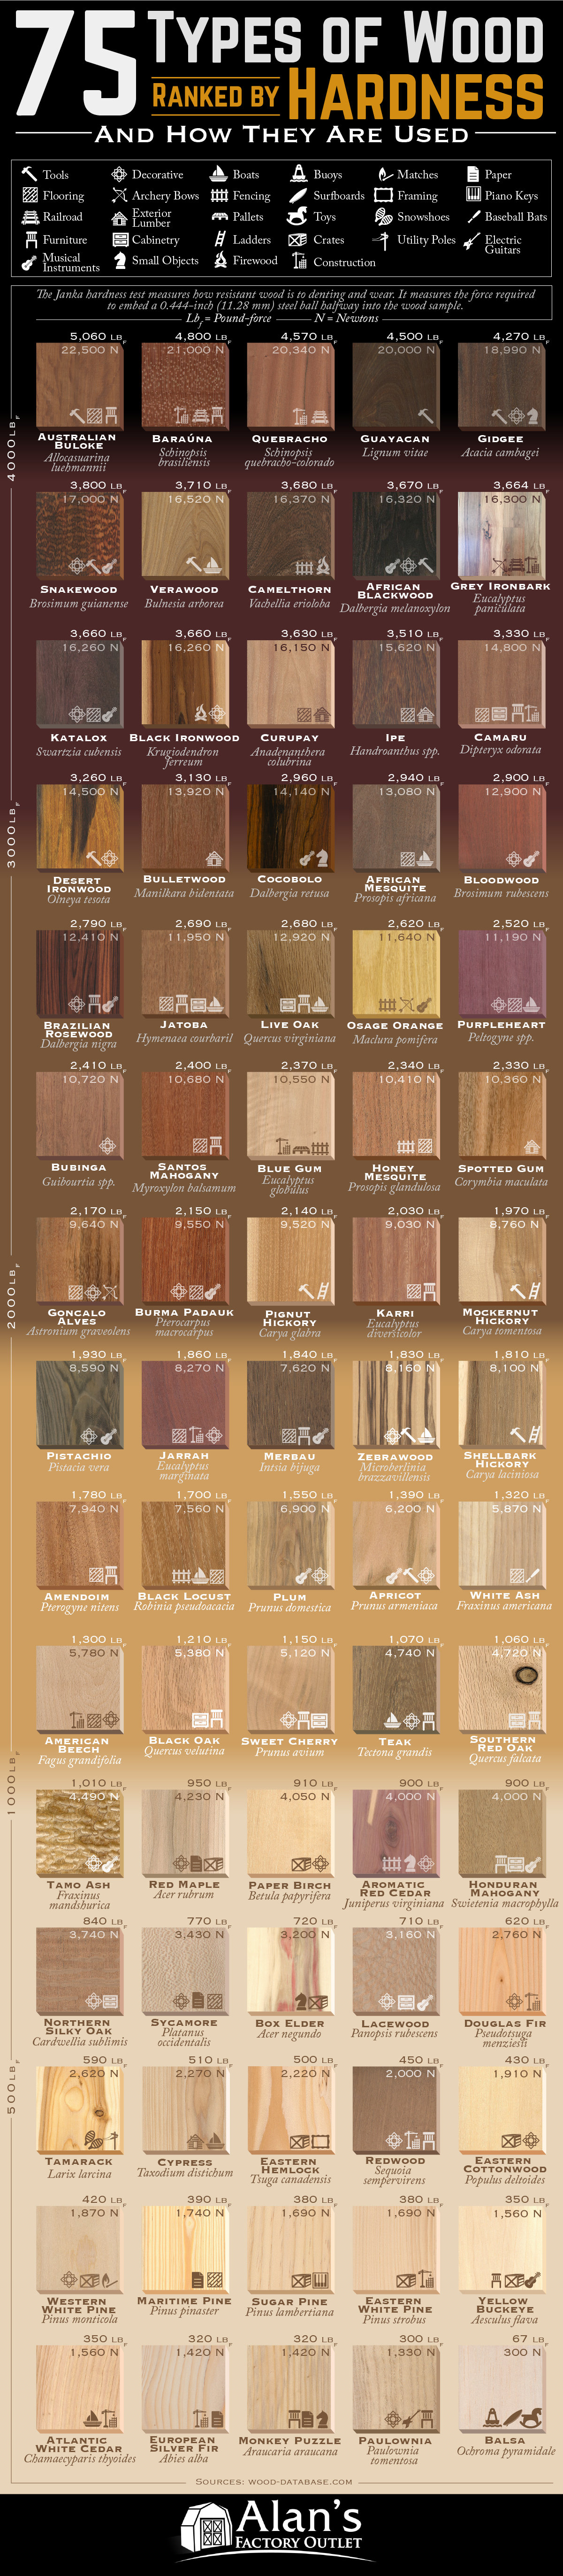 Ranking of 75 Types of Wood According to the Janka Hardness Test - Infographic